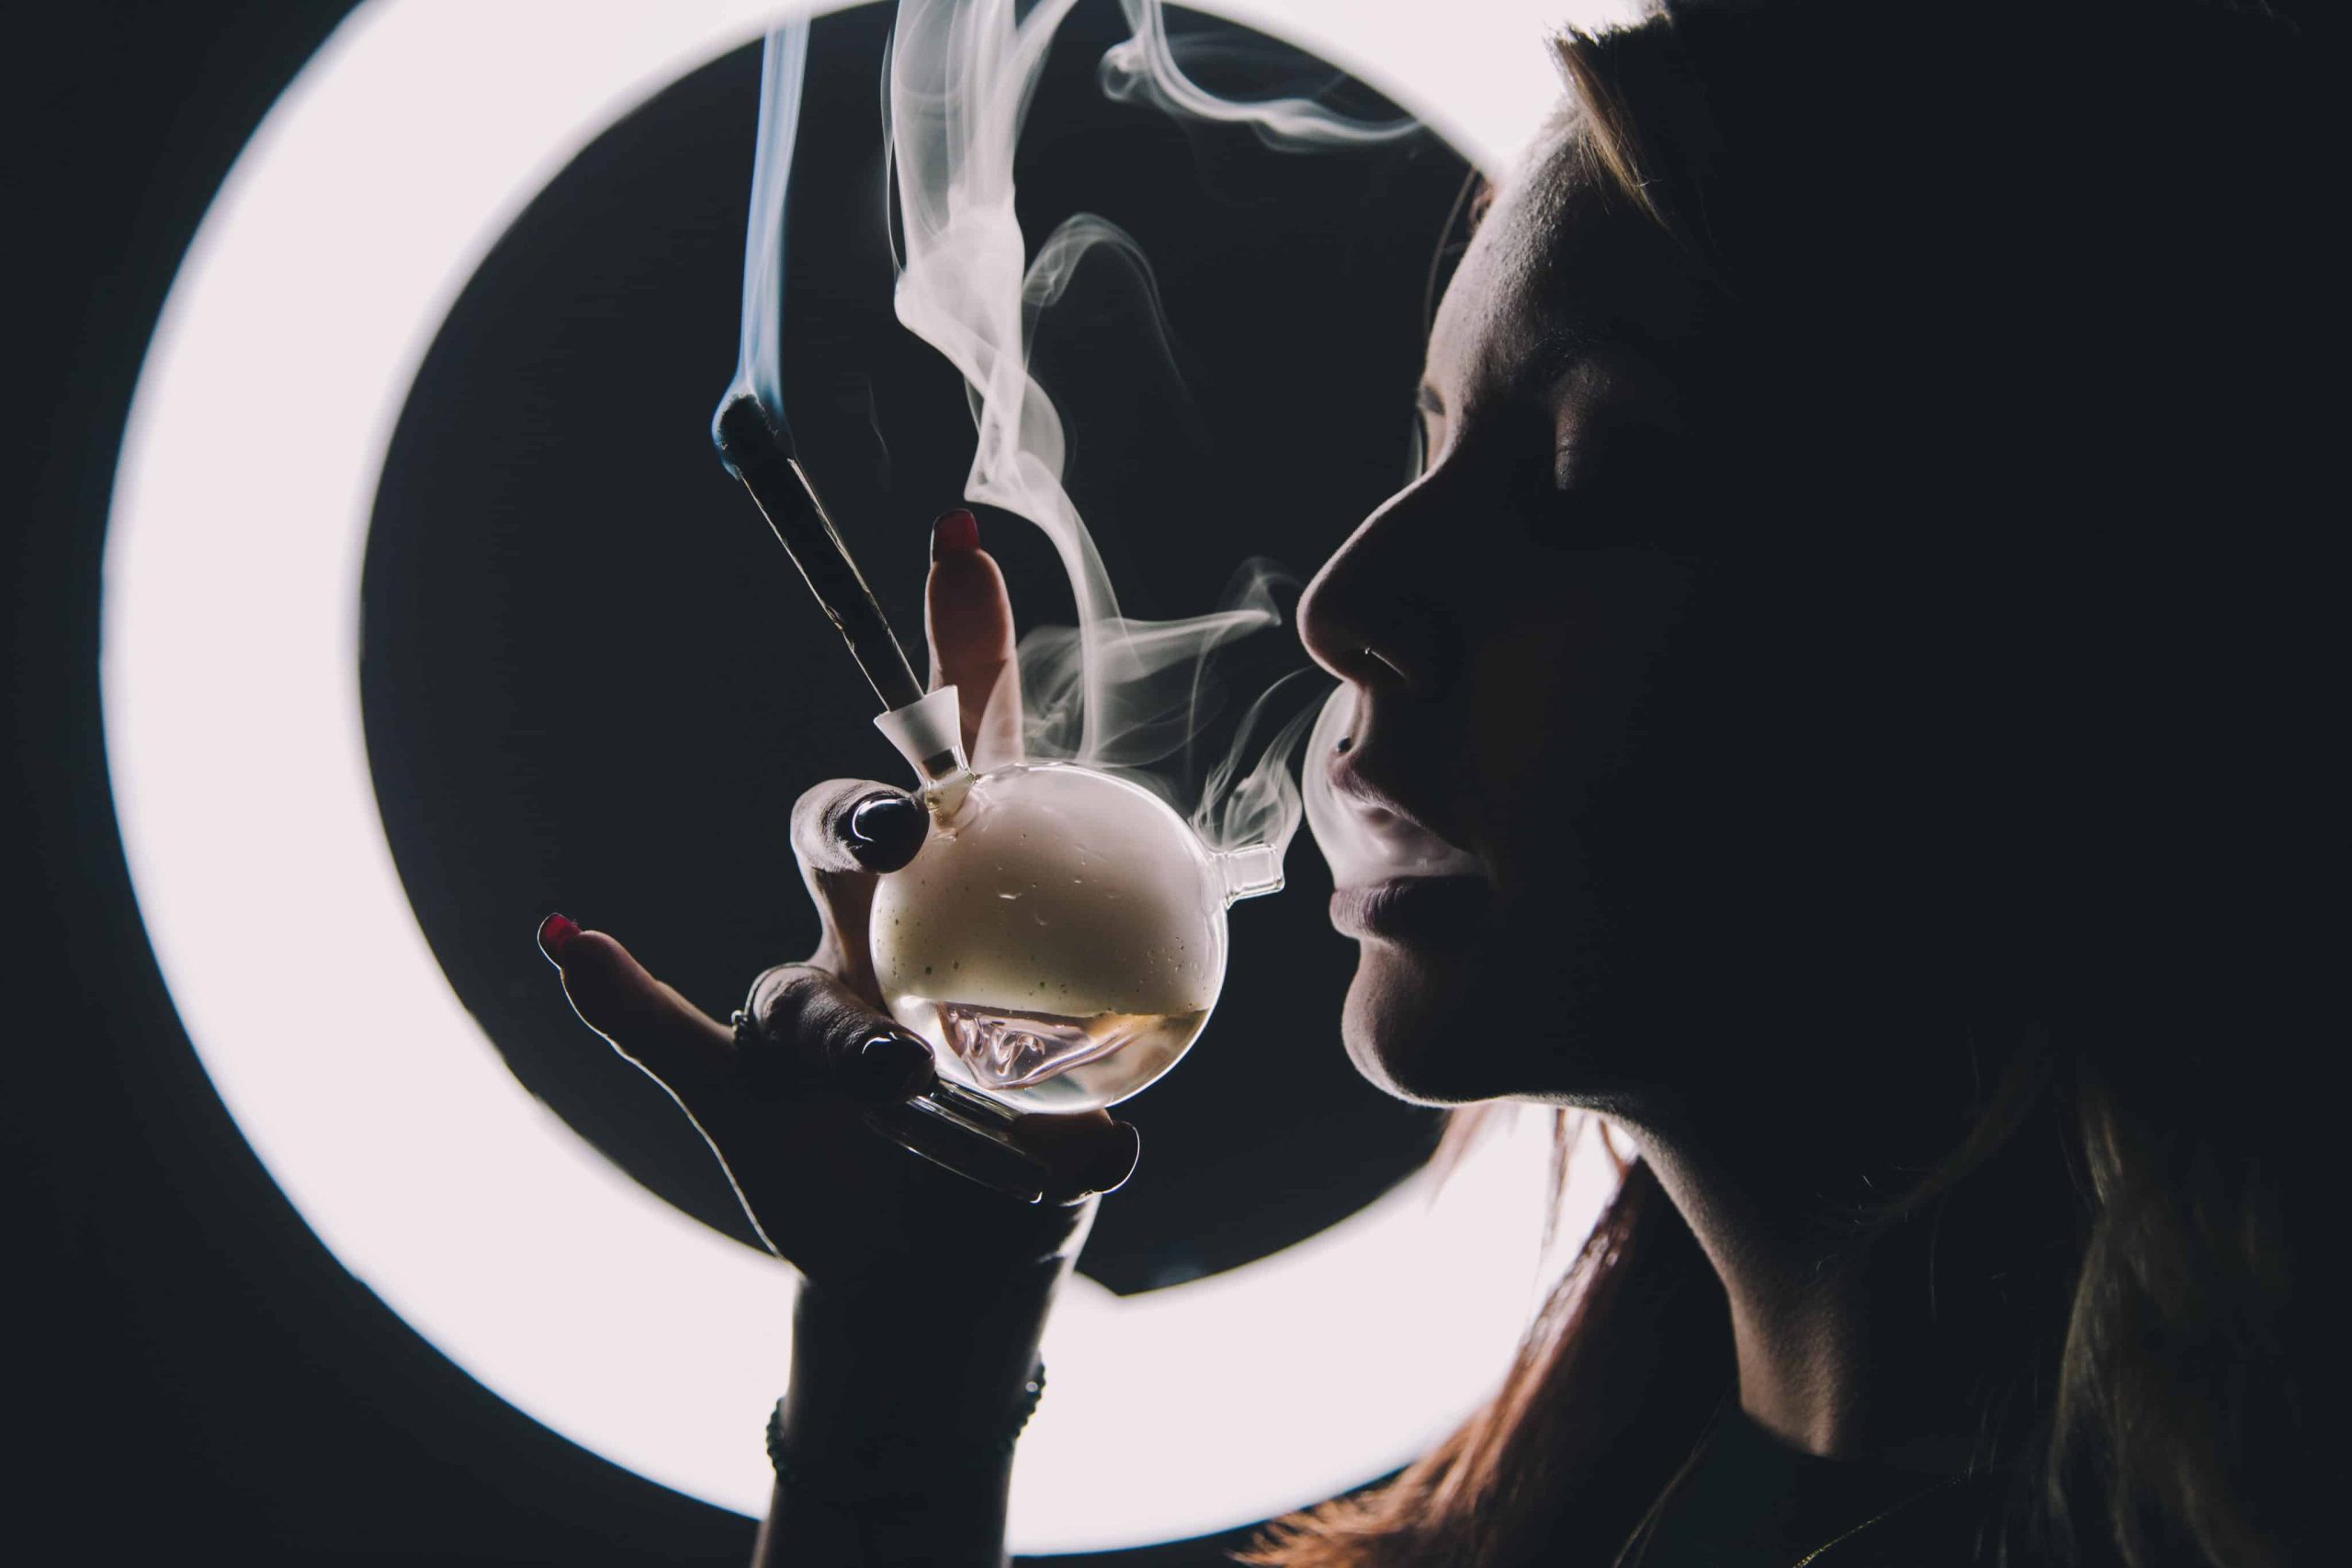 Nevada Officials Award Final 20 Licenses for Cannabis Lounges